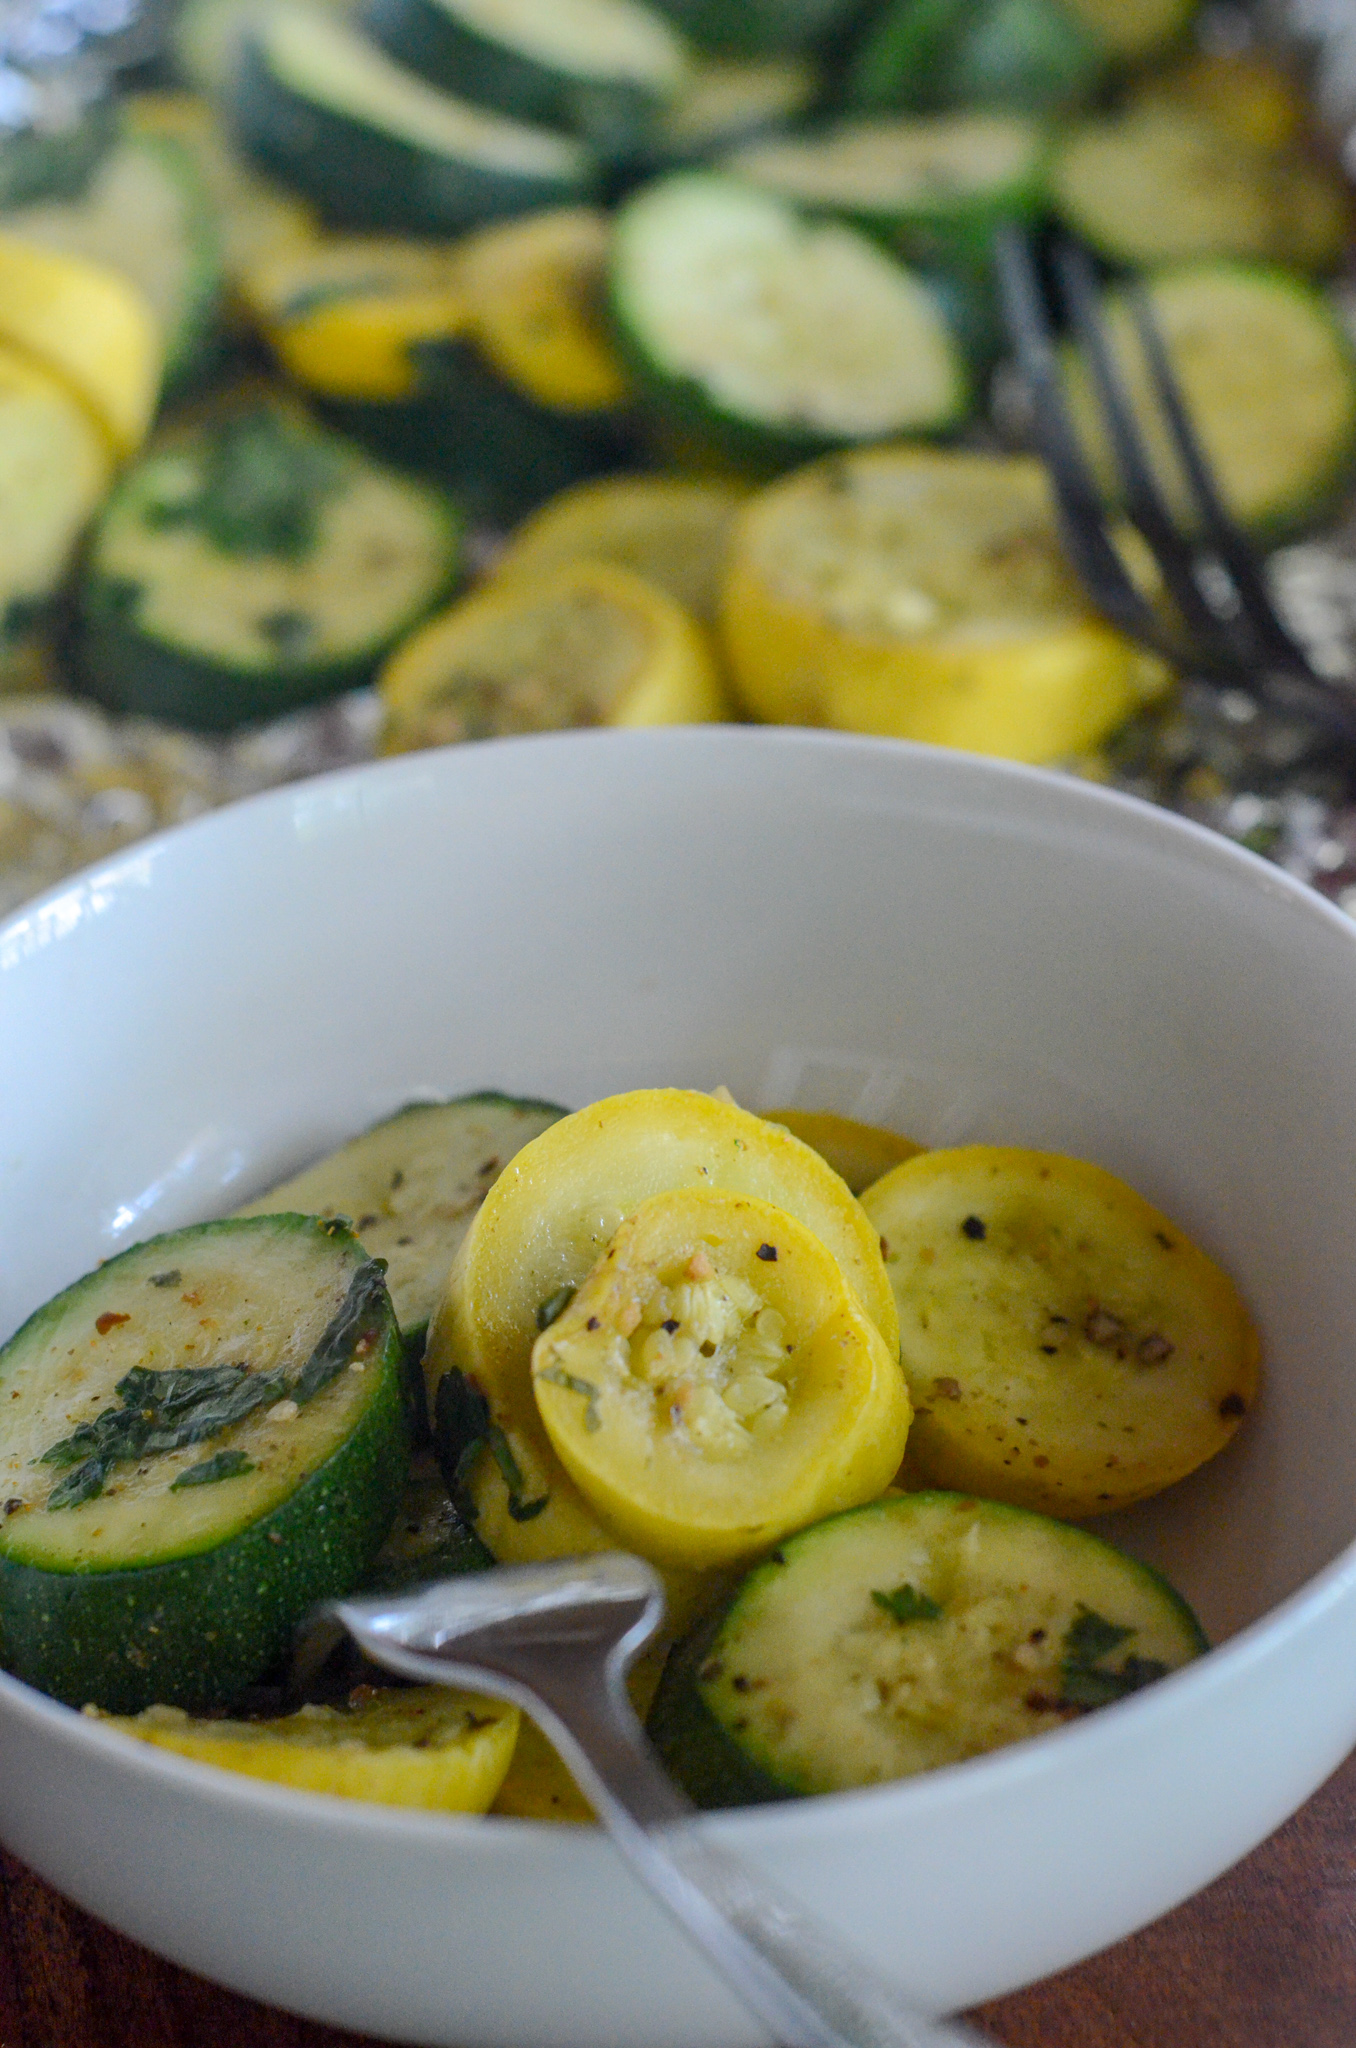 Perfectly Seasoned Zucchini and Squash in Foil Packets (2 Ways)